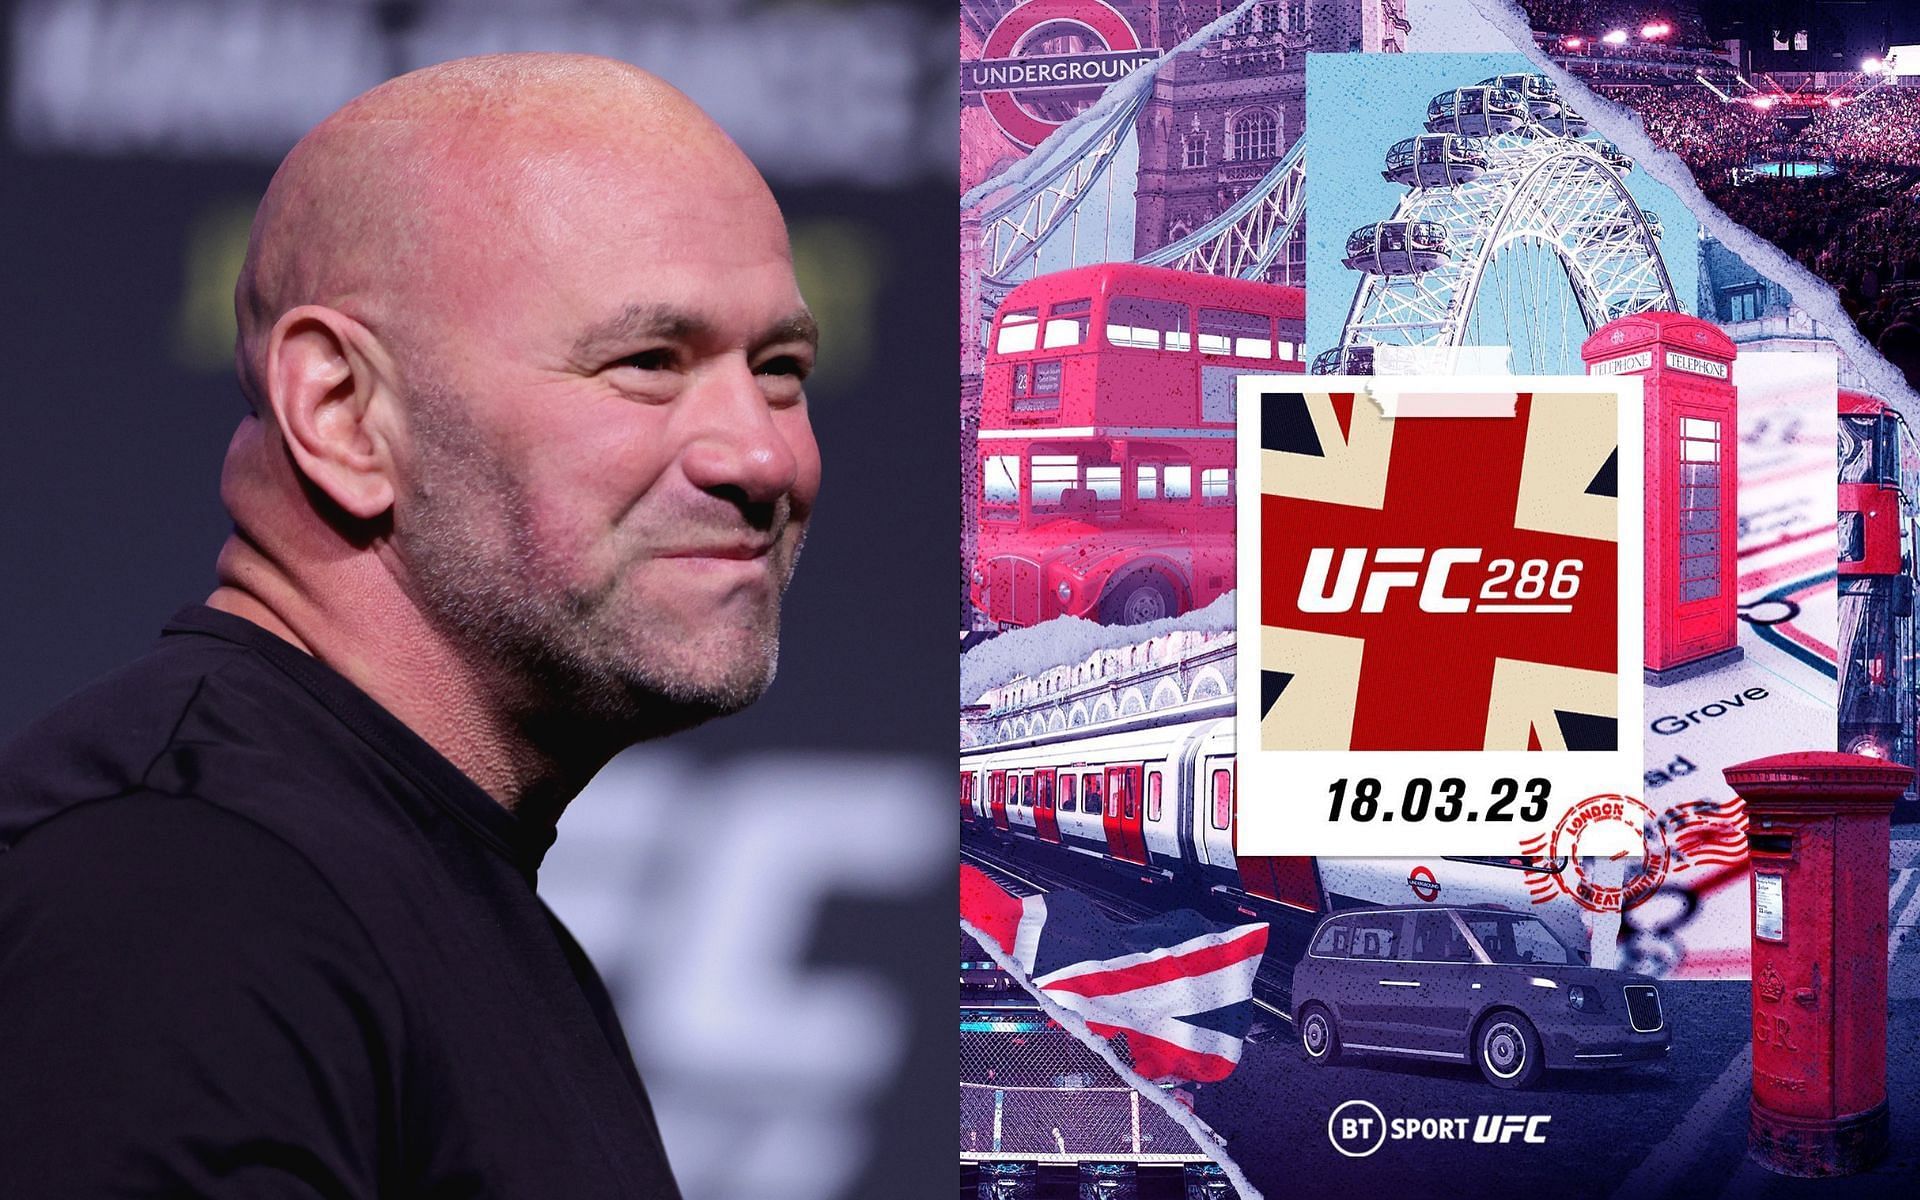 Dana White (Left) and a UFC 286 promotional poster (Right) [Image courtesy: Getty Images and @ufcbtsport Instagram]